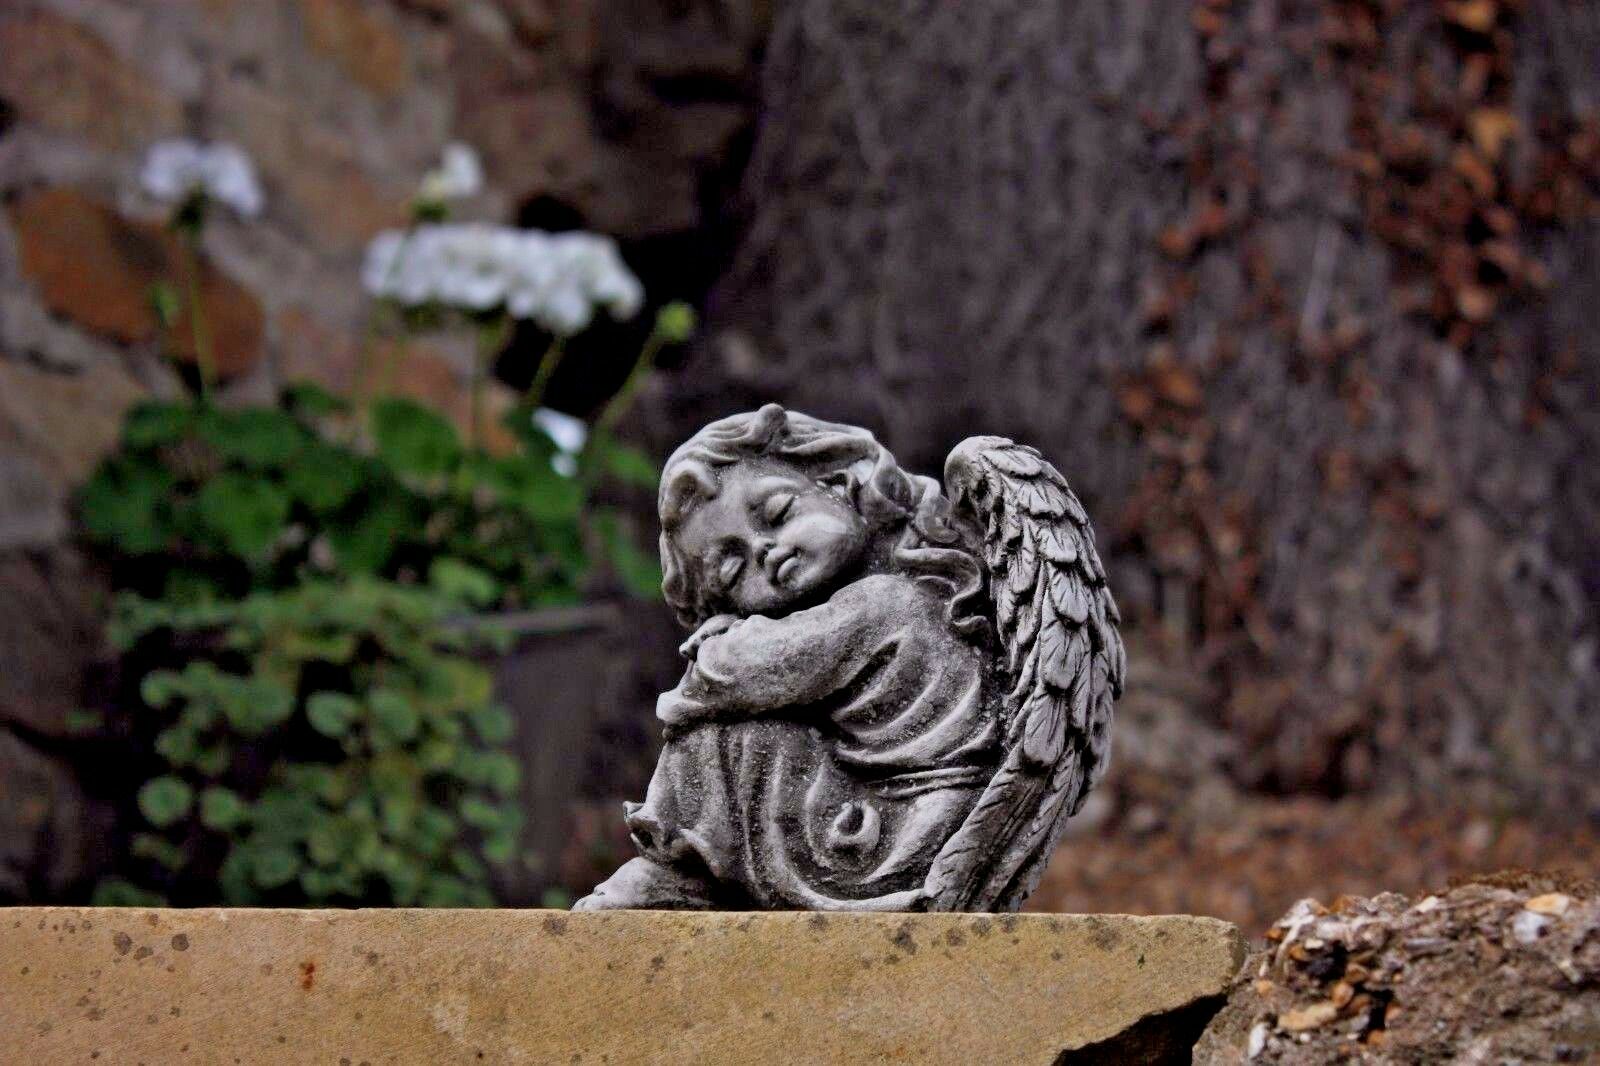 Pair of Small Stone Sleeping Angel Ornaments